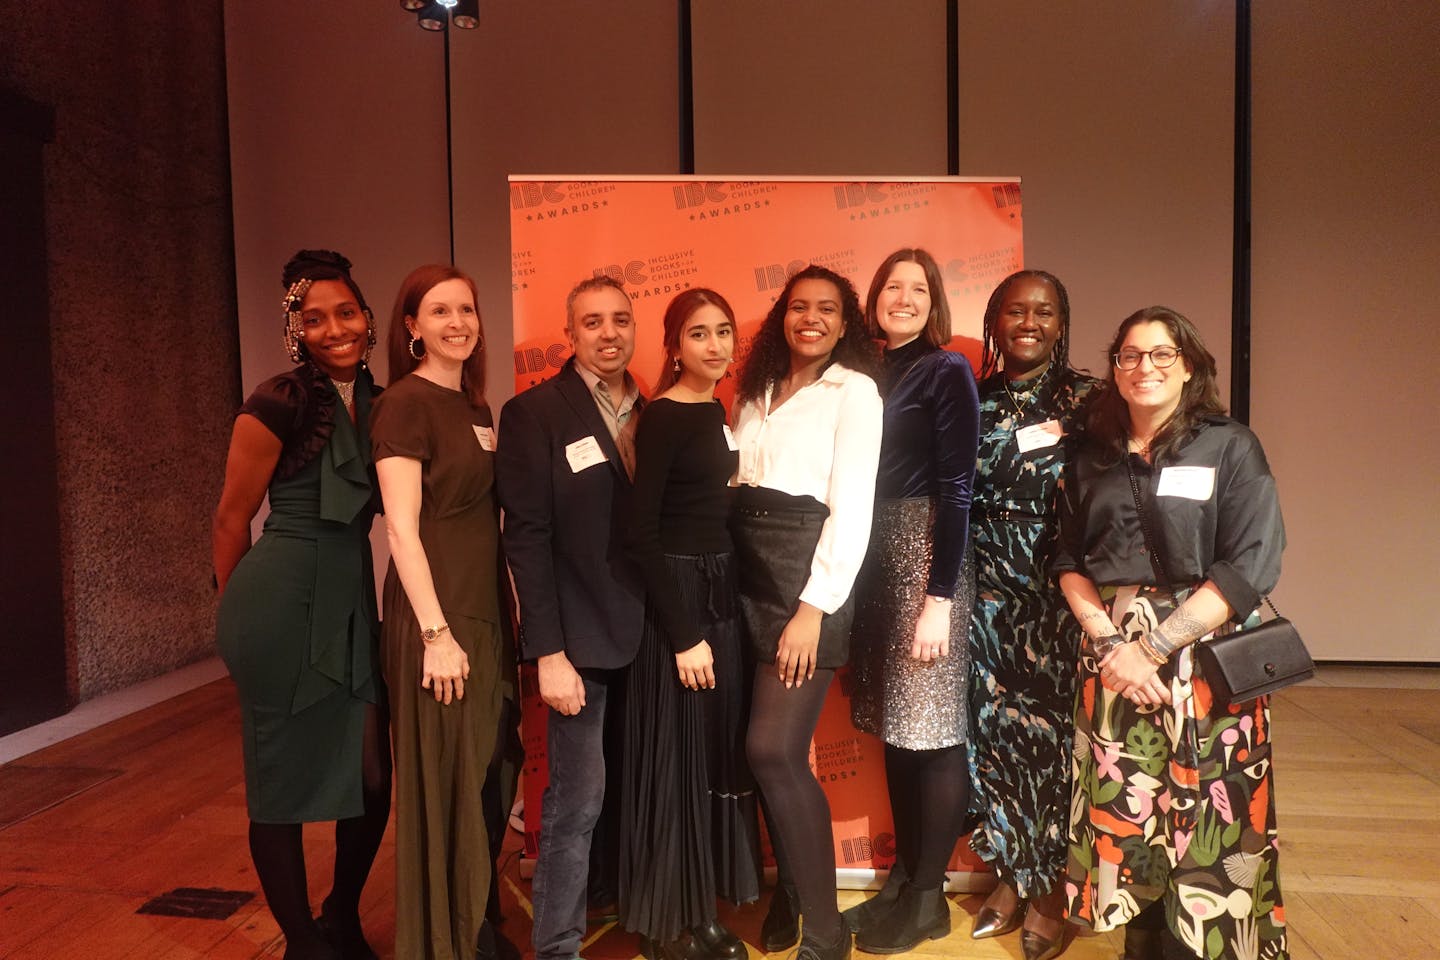 A team photo from the IBC Awards 2024 showing (left to right) Kea, Sarah Jake, Jayna, Kristel, Sophie, Fabia and Sinead, standing in front of an IBC Awards banner at the Barbican.